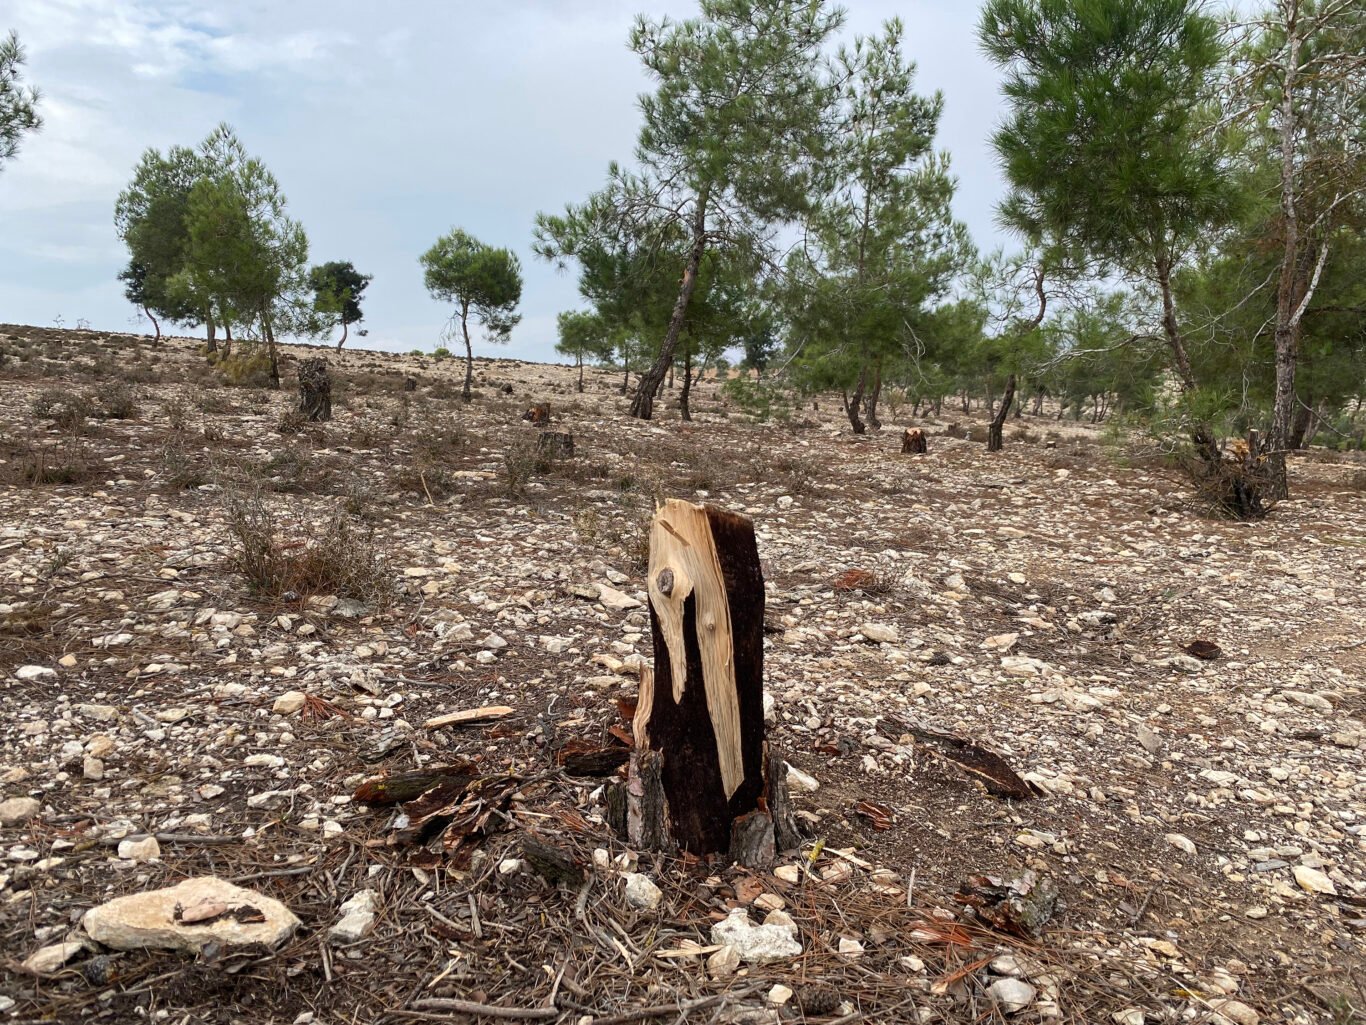 Afrin, November 2022, stumps of several trees cut down in an Afrin's Bafilyoun forest patch due to illegal logging by Turkish occupation.